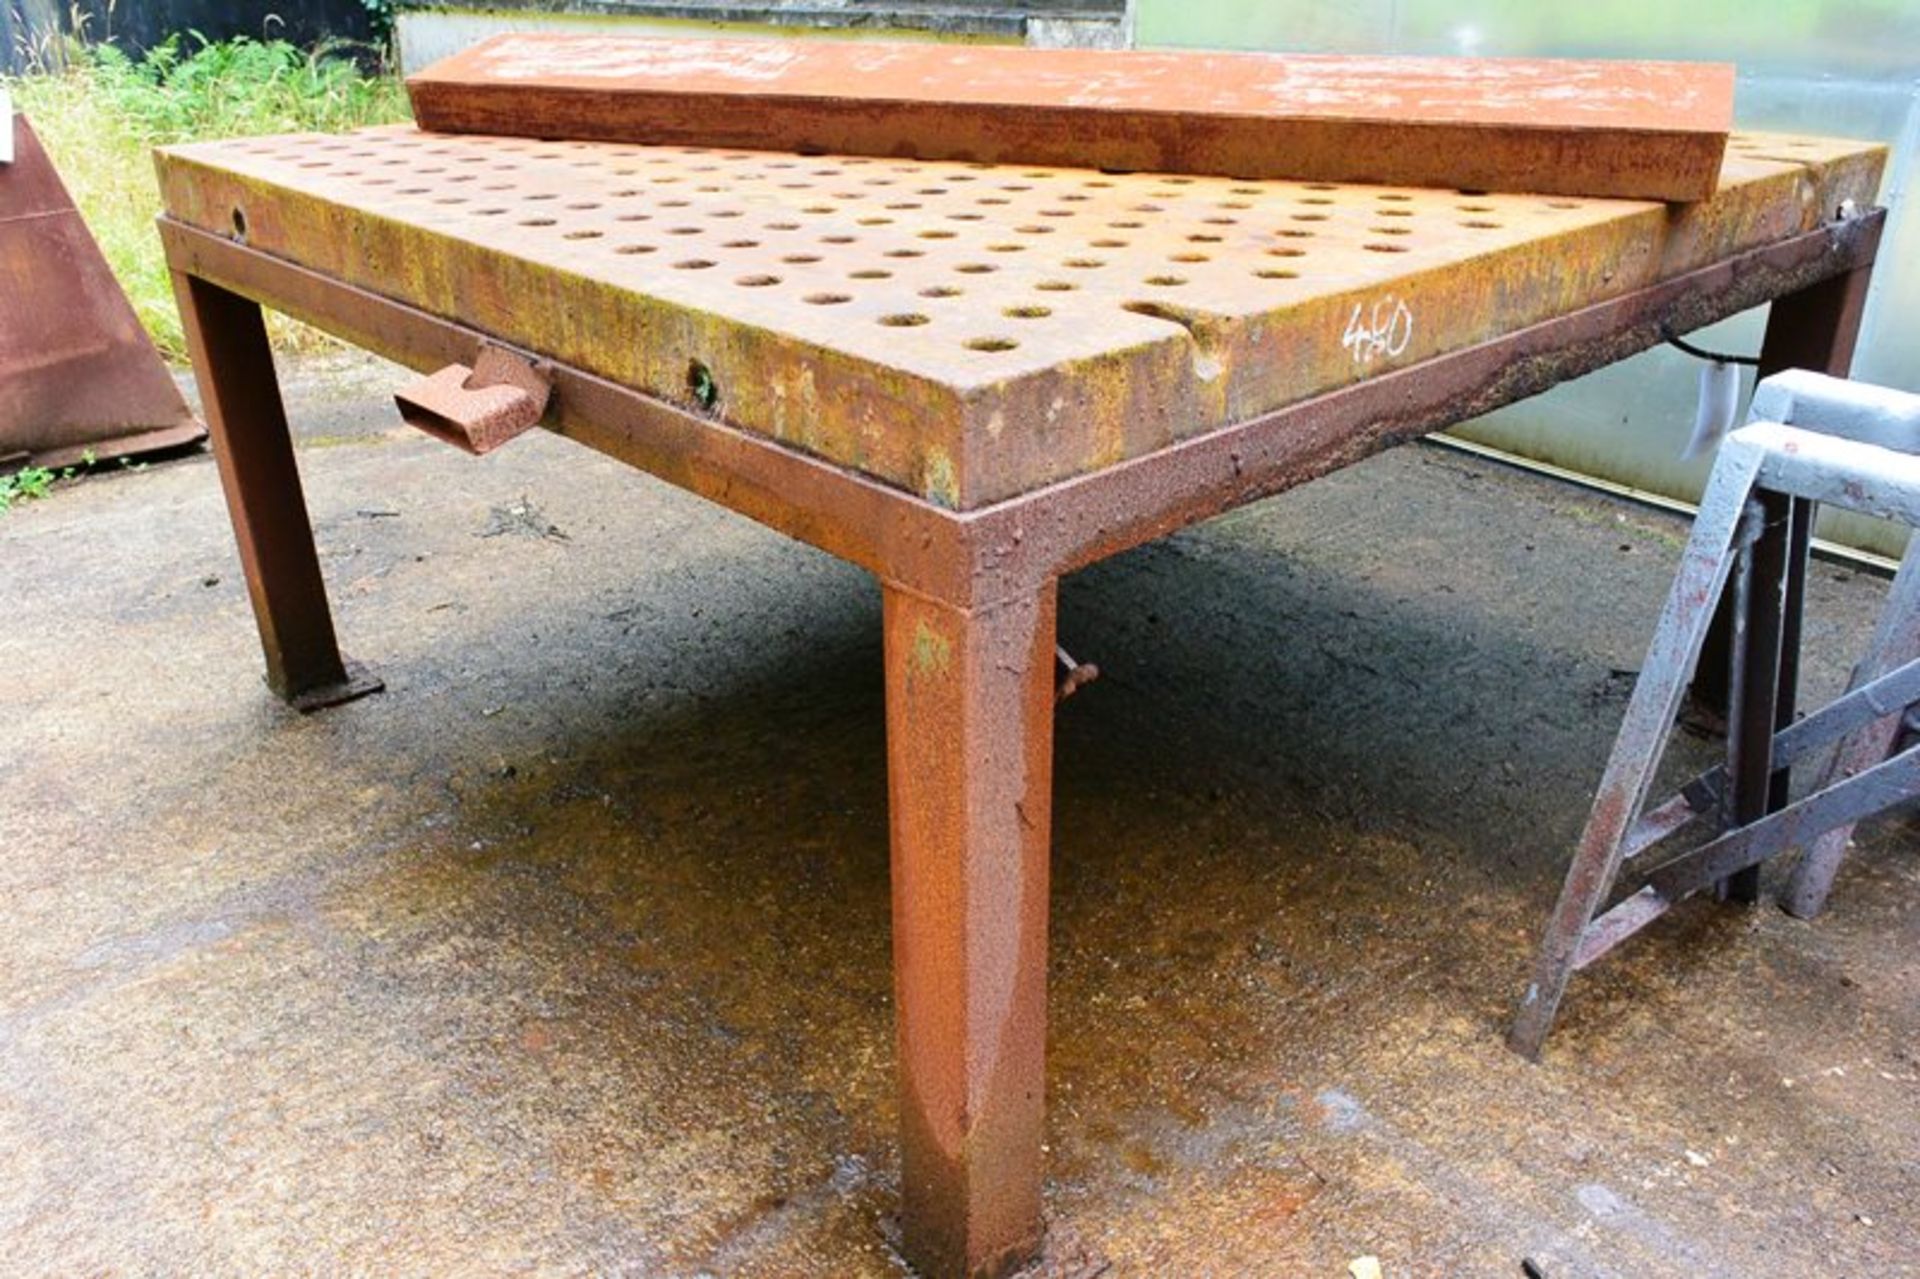 Steel table, approx 2 x 2m, mounted on frame (Recommended collection period for this lot Wednesday